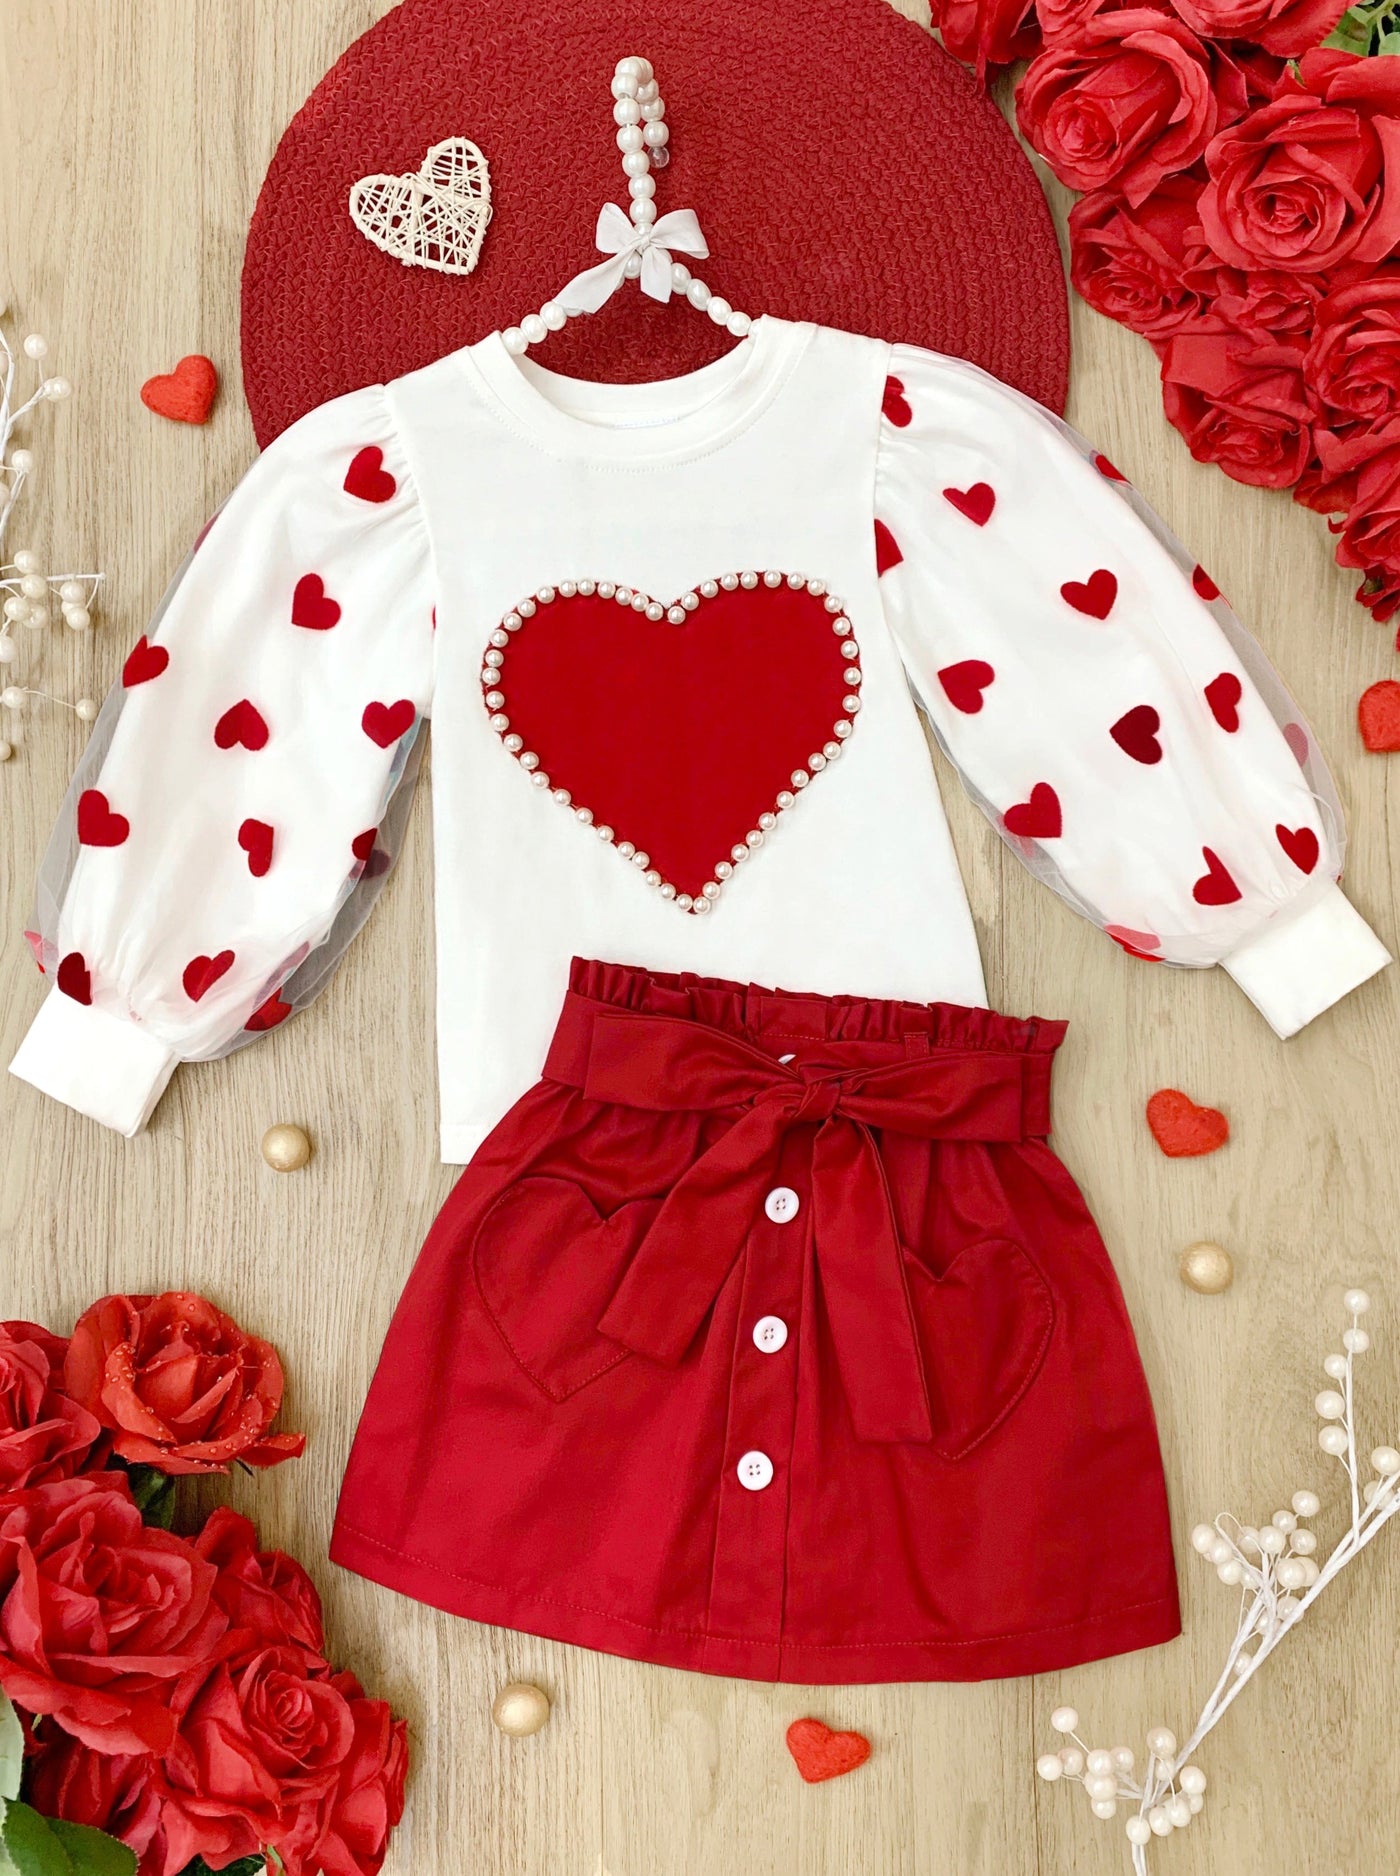 Toddler Valentine's Outfits | Heart Tulle Sleeve Top and Skirt Set ...